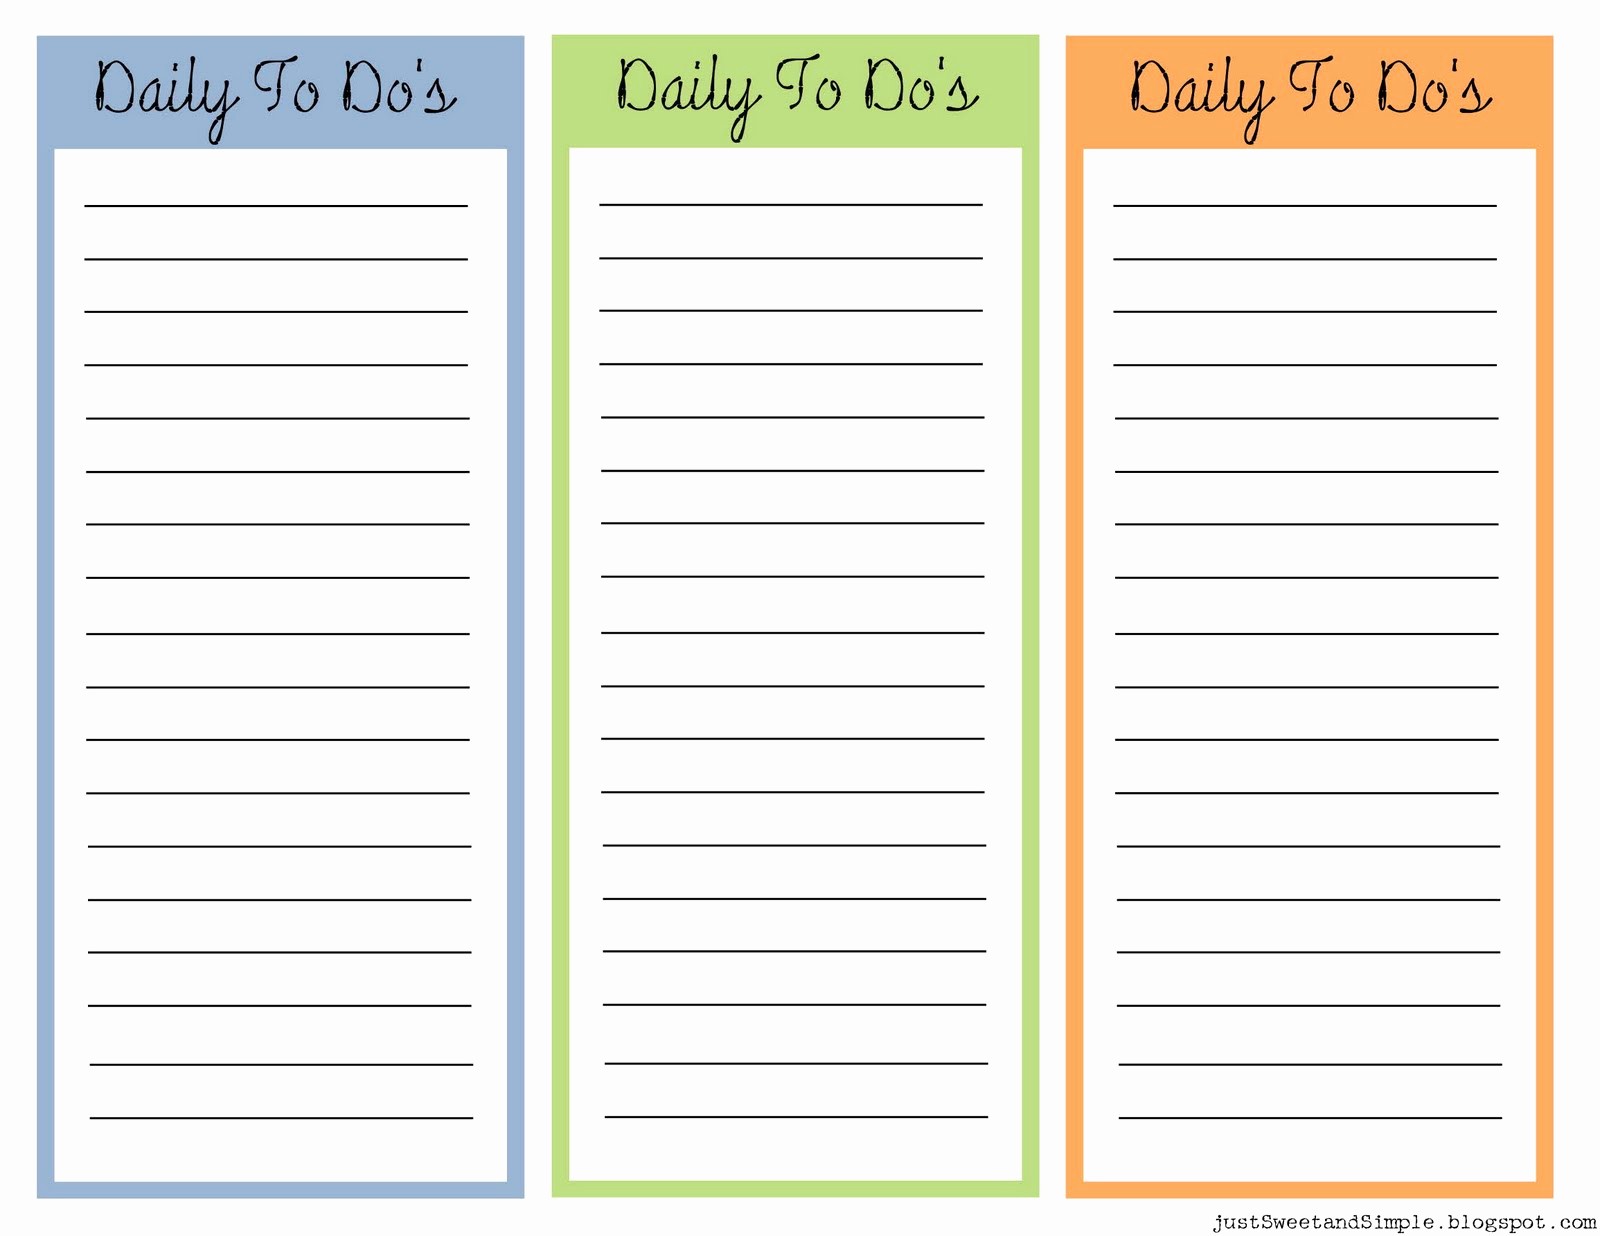 Daily to Do List Examples New Just Sweet and Simple May 2011